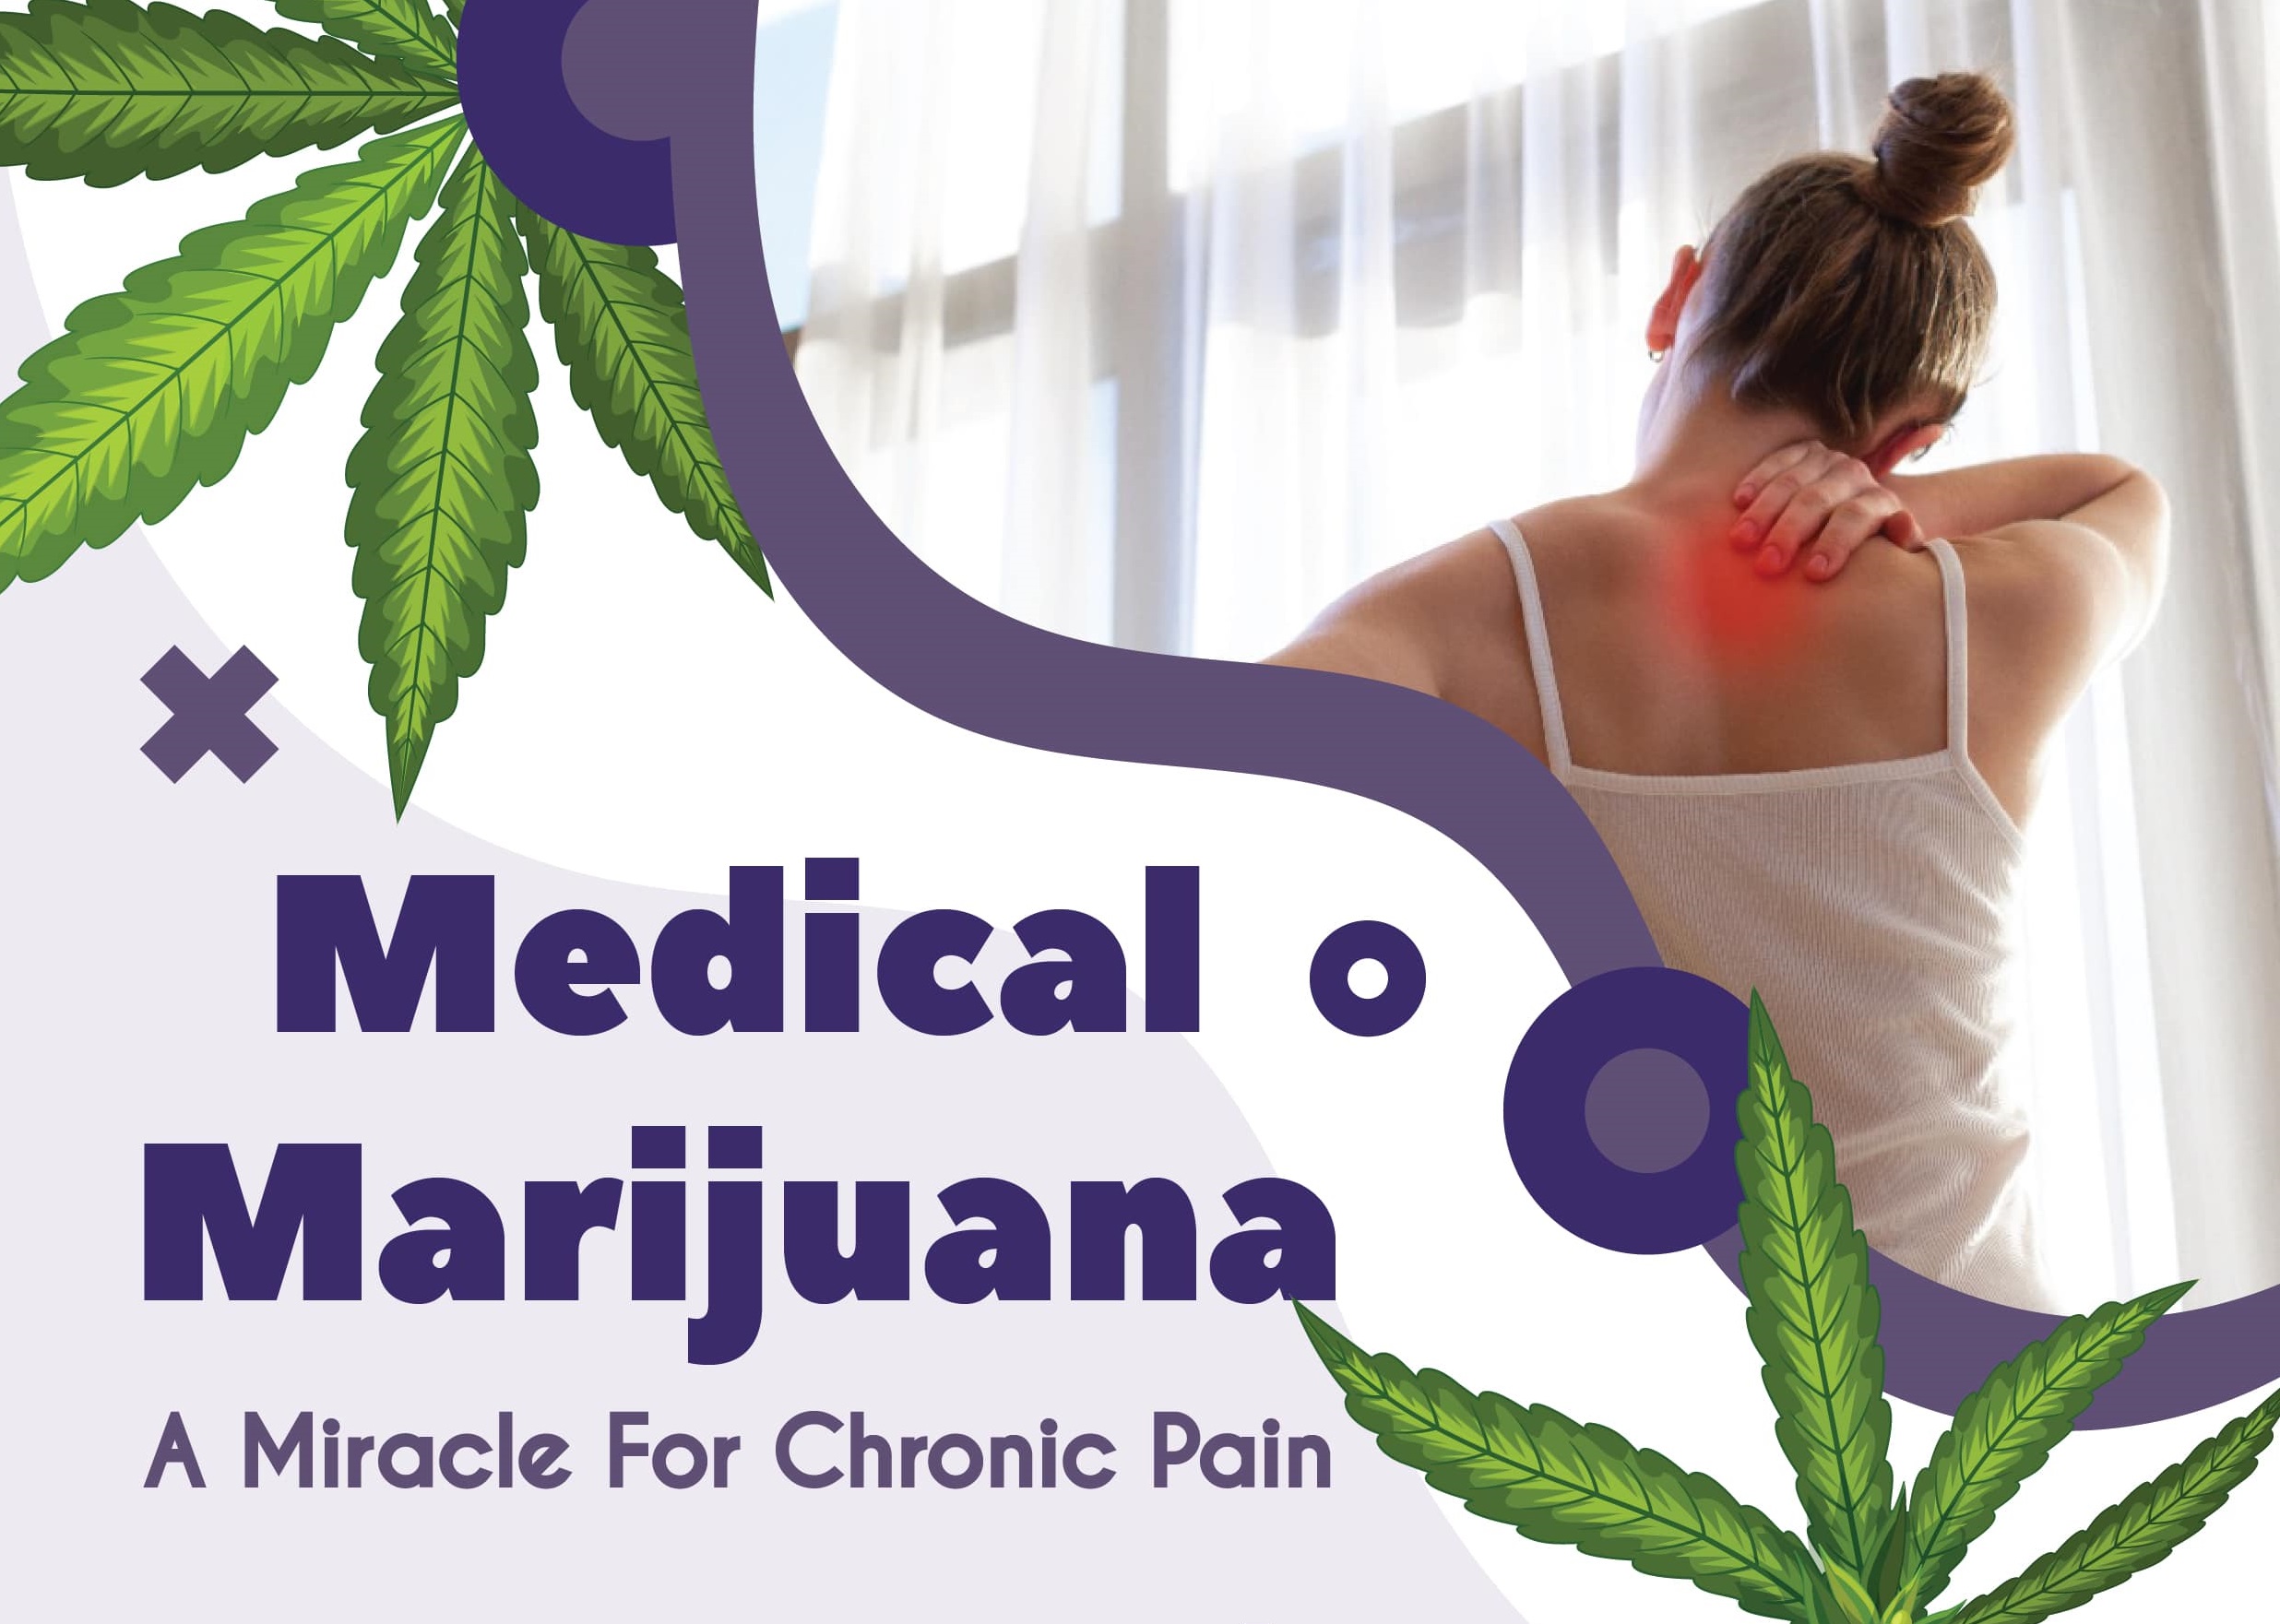 Mirachle for Chronic Pain